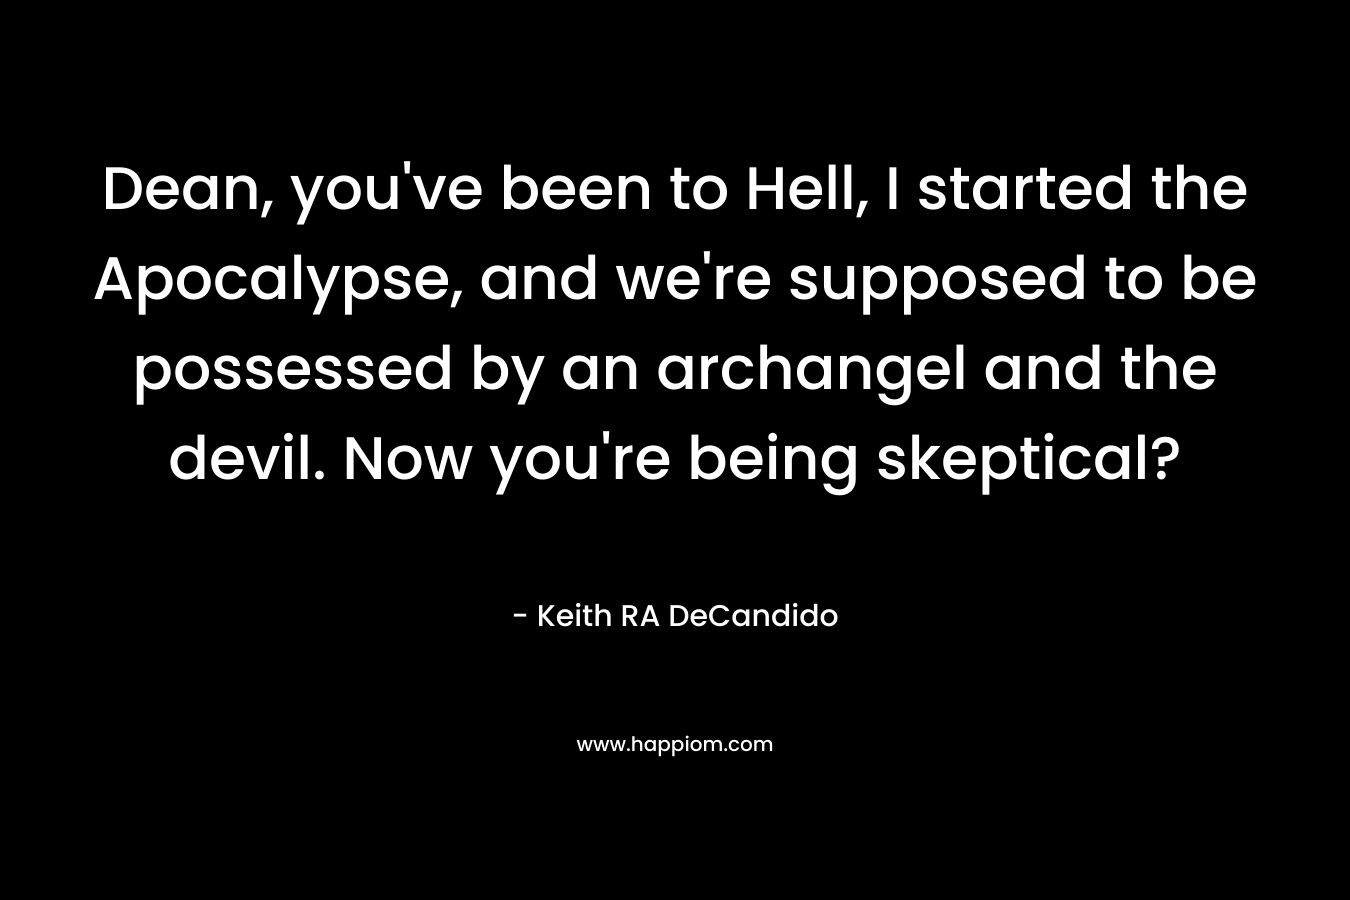 Dean, you’ve been to Hell, I started the Apocalypse, and we’re supposed to be possessed by an archangel and the devil. Now you’re being skeptical? – Keith RA DeCandido